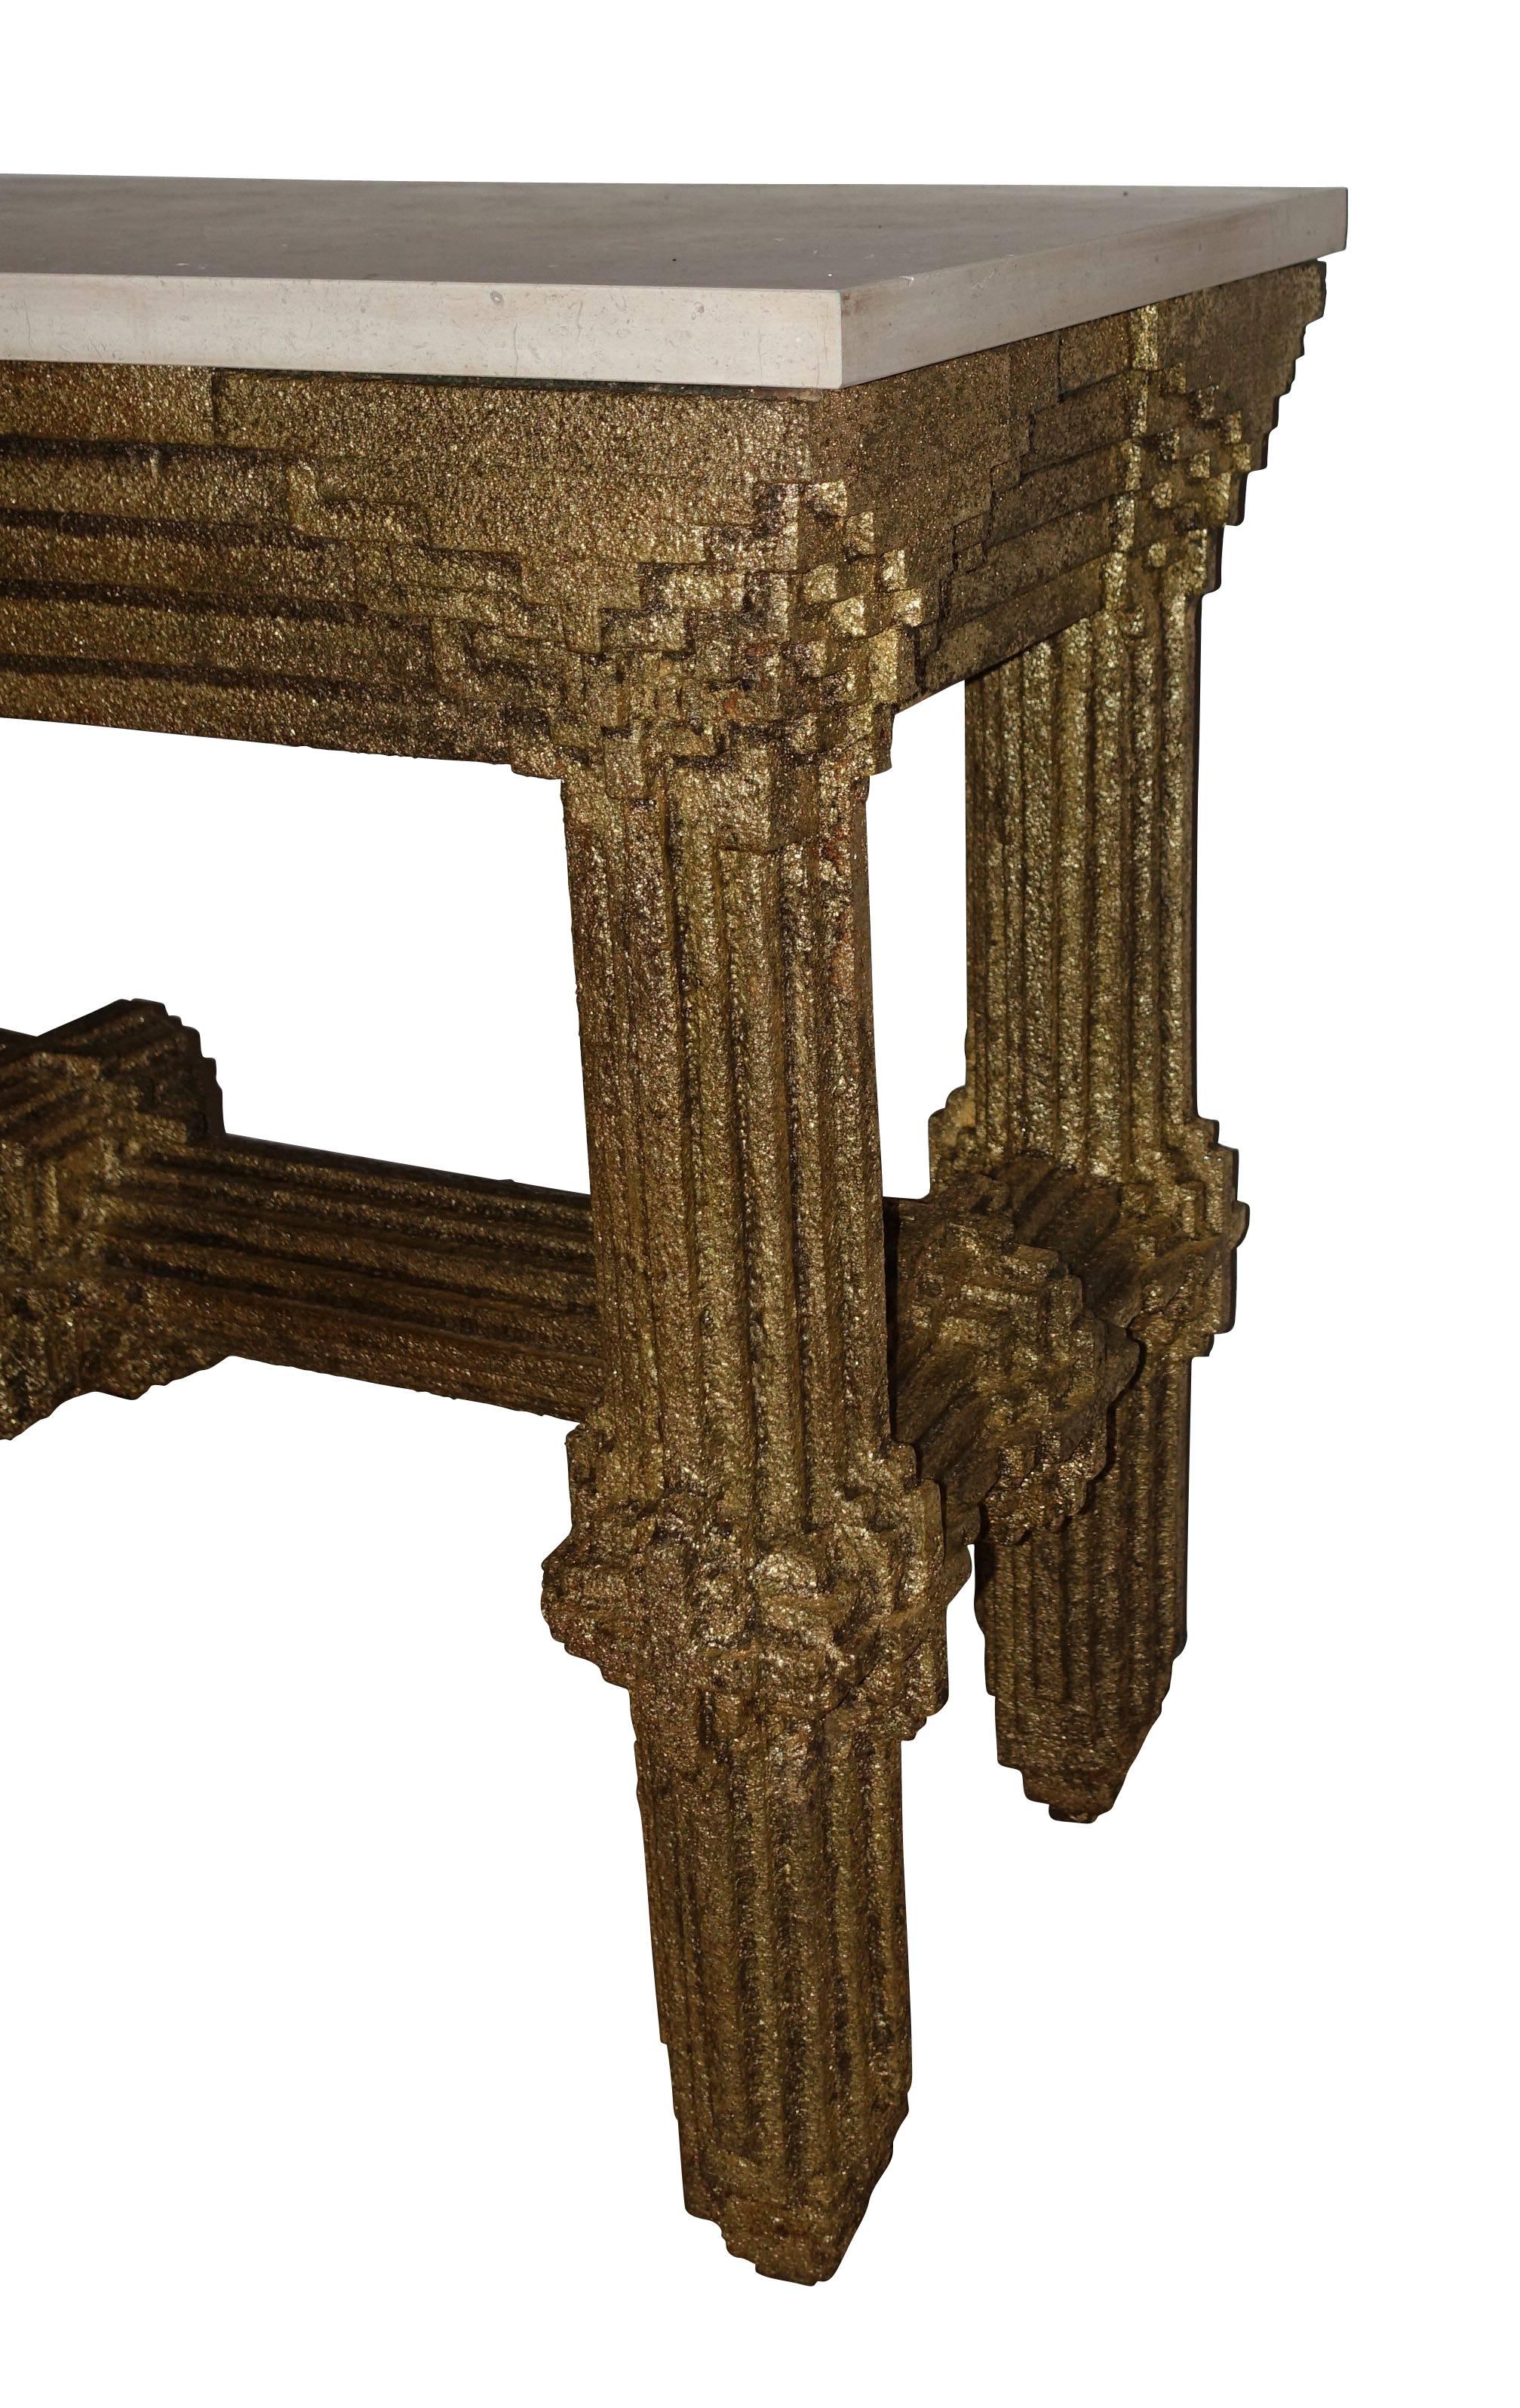 1950's French unusual and dramatic gold gilt multi layered wood in Brutalist design console table.
Travertine stone top.
  